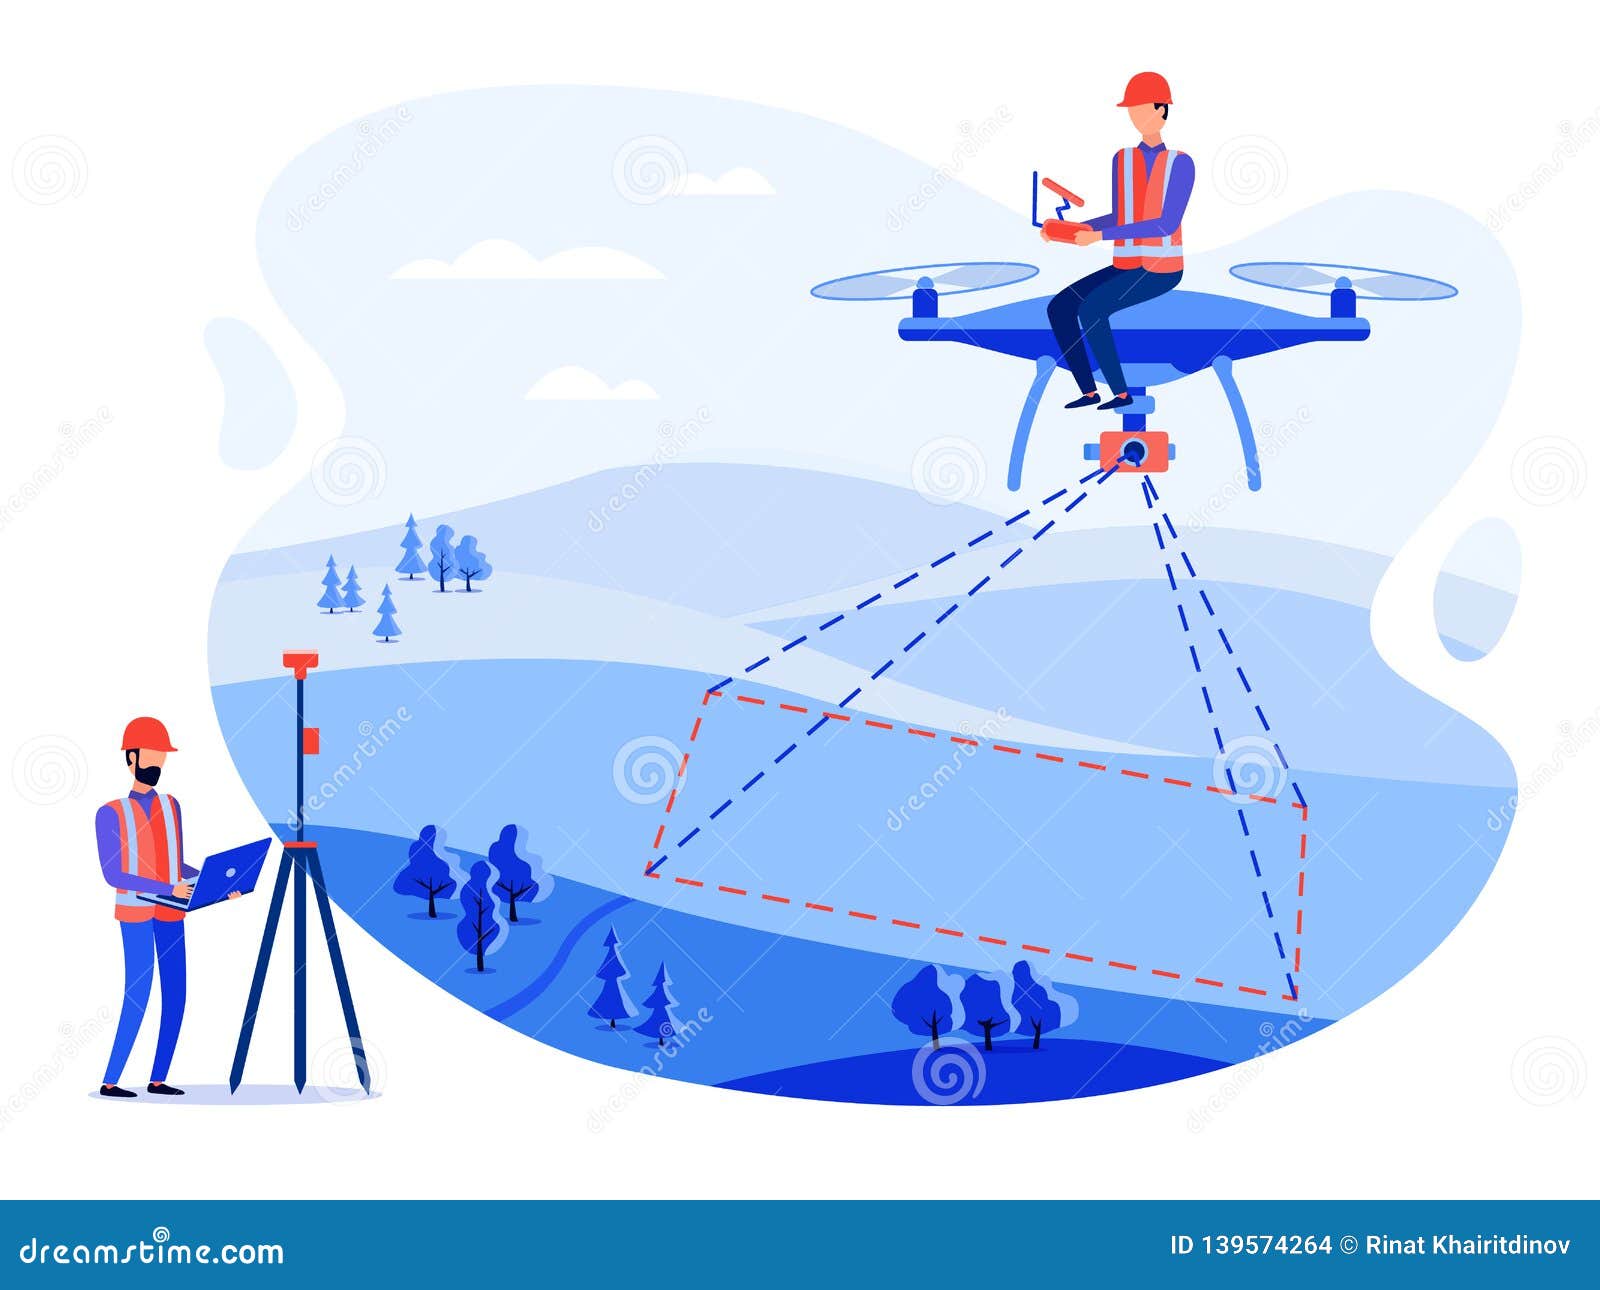 concept cadastral engineers, surveyors and cartographers make geodetic measurements using a drone, copter